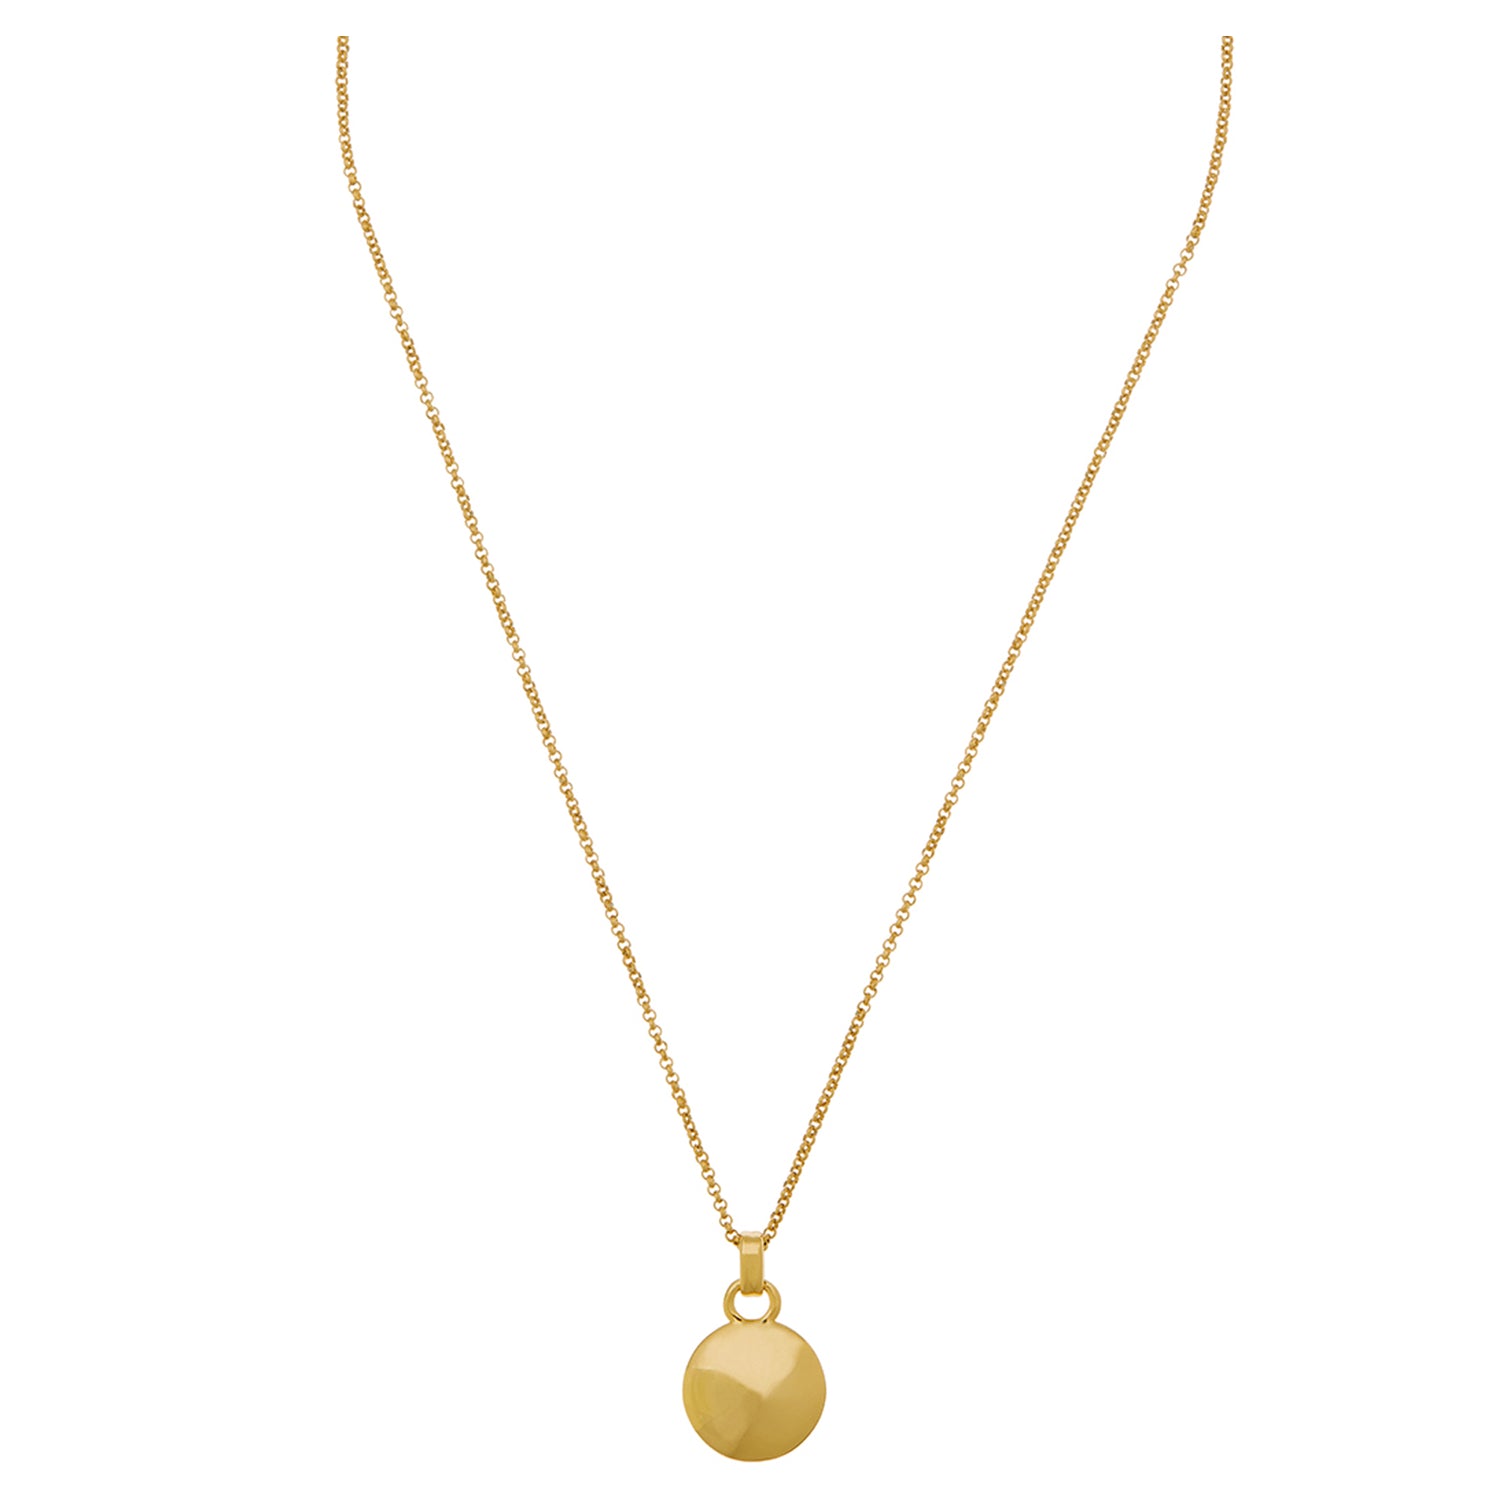 Dcfywl731 Gold Long Pendant Necklace for Women Simple Three India | Ubuy